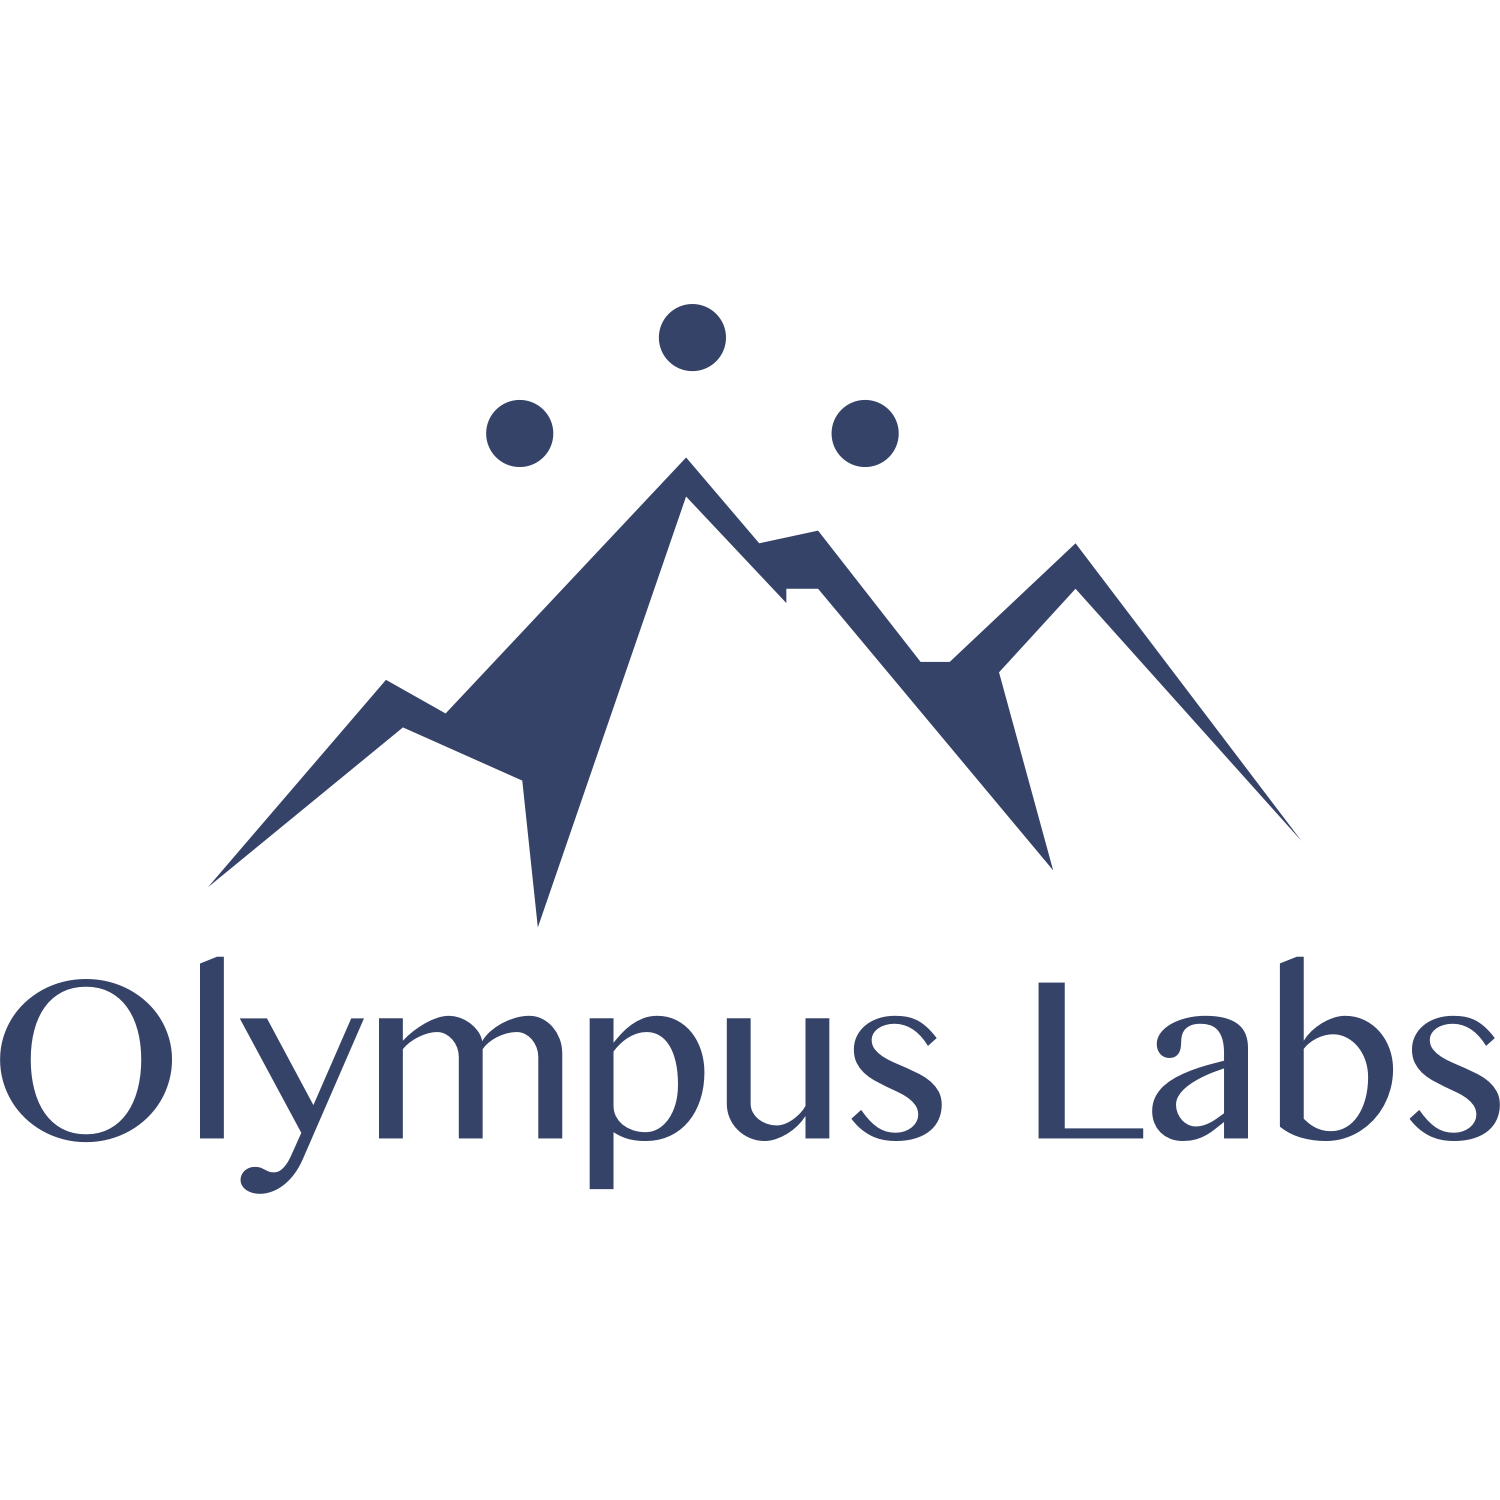 OLYMPUS LABS LAUNCHE